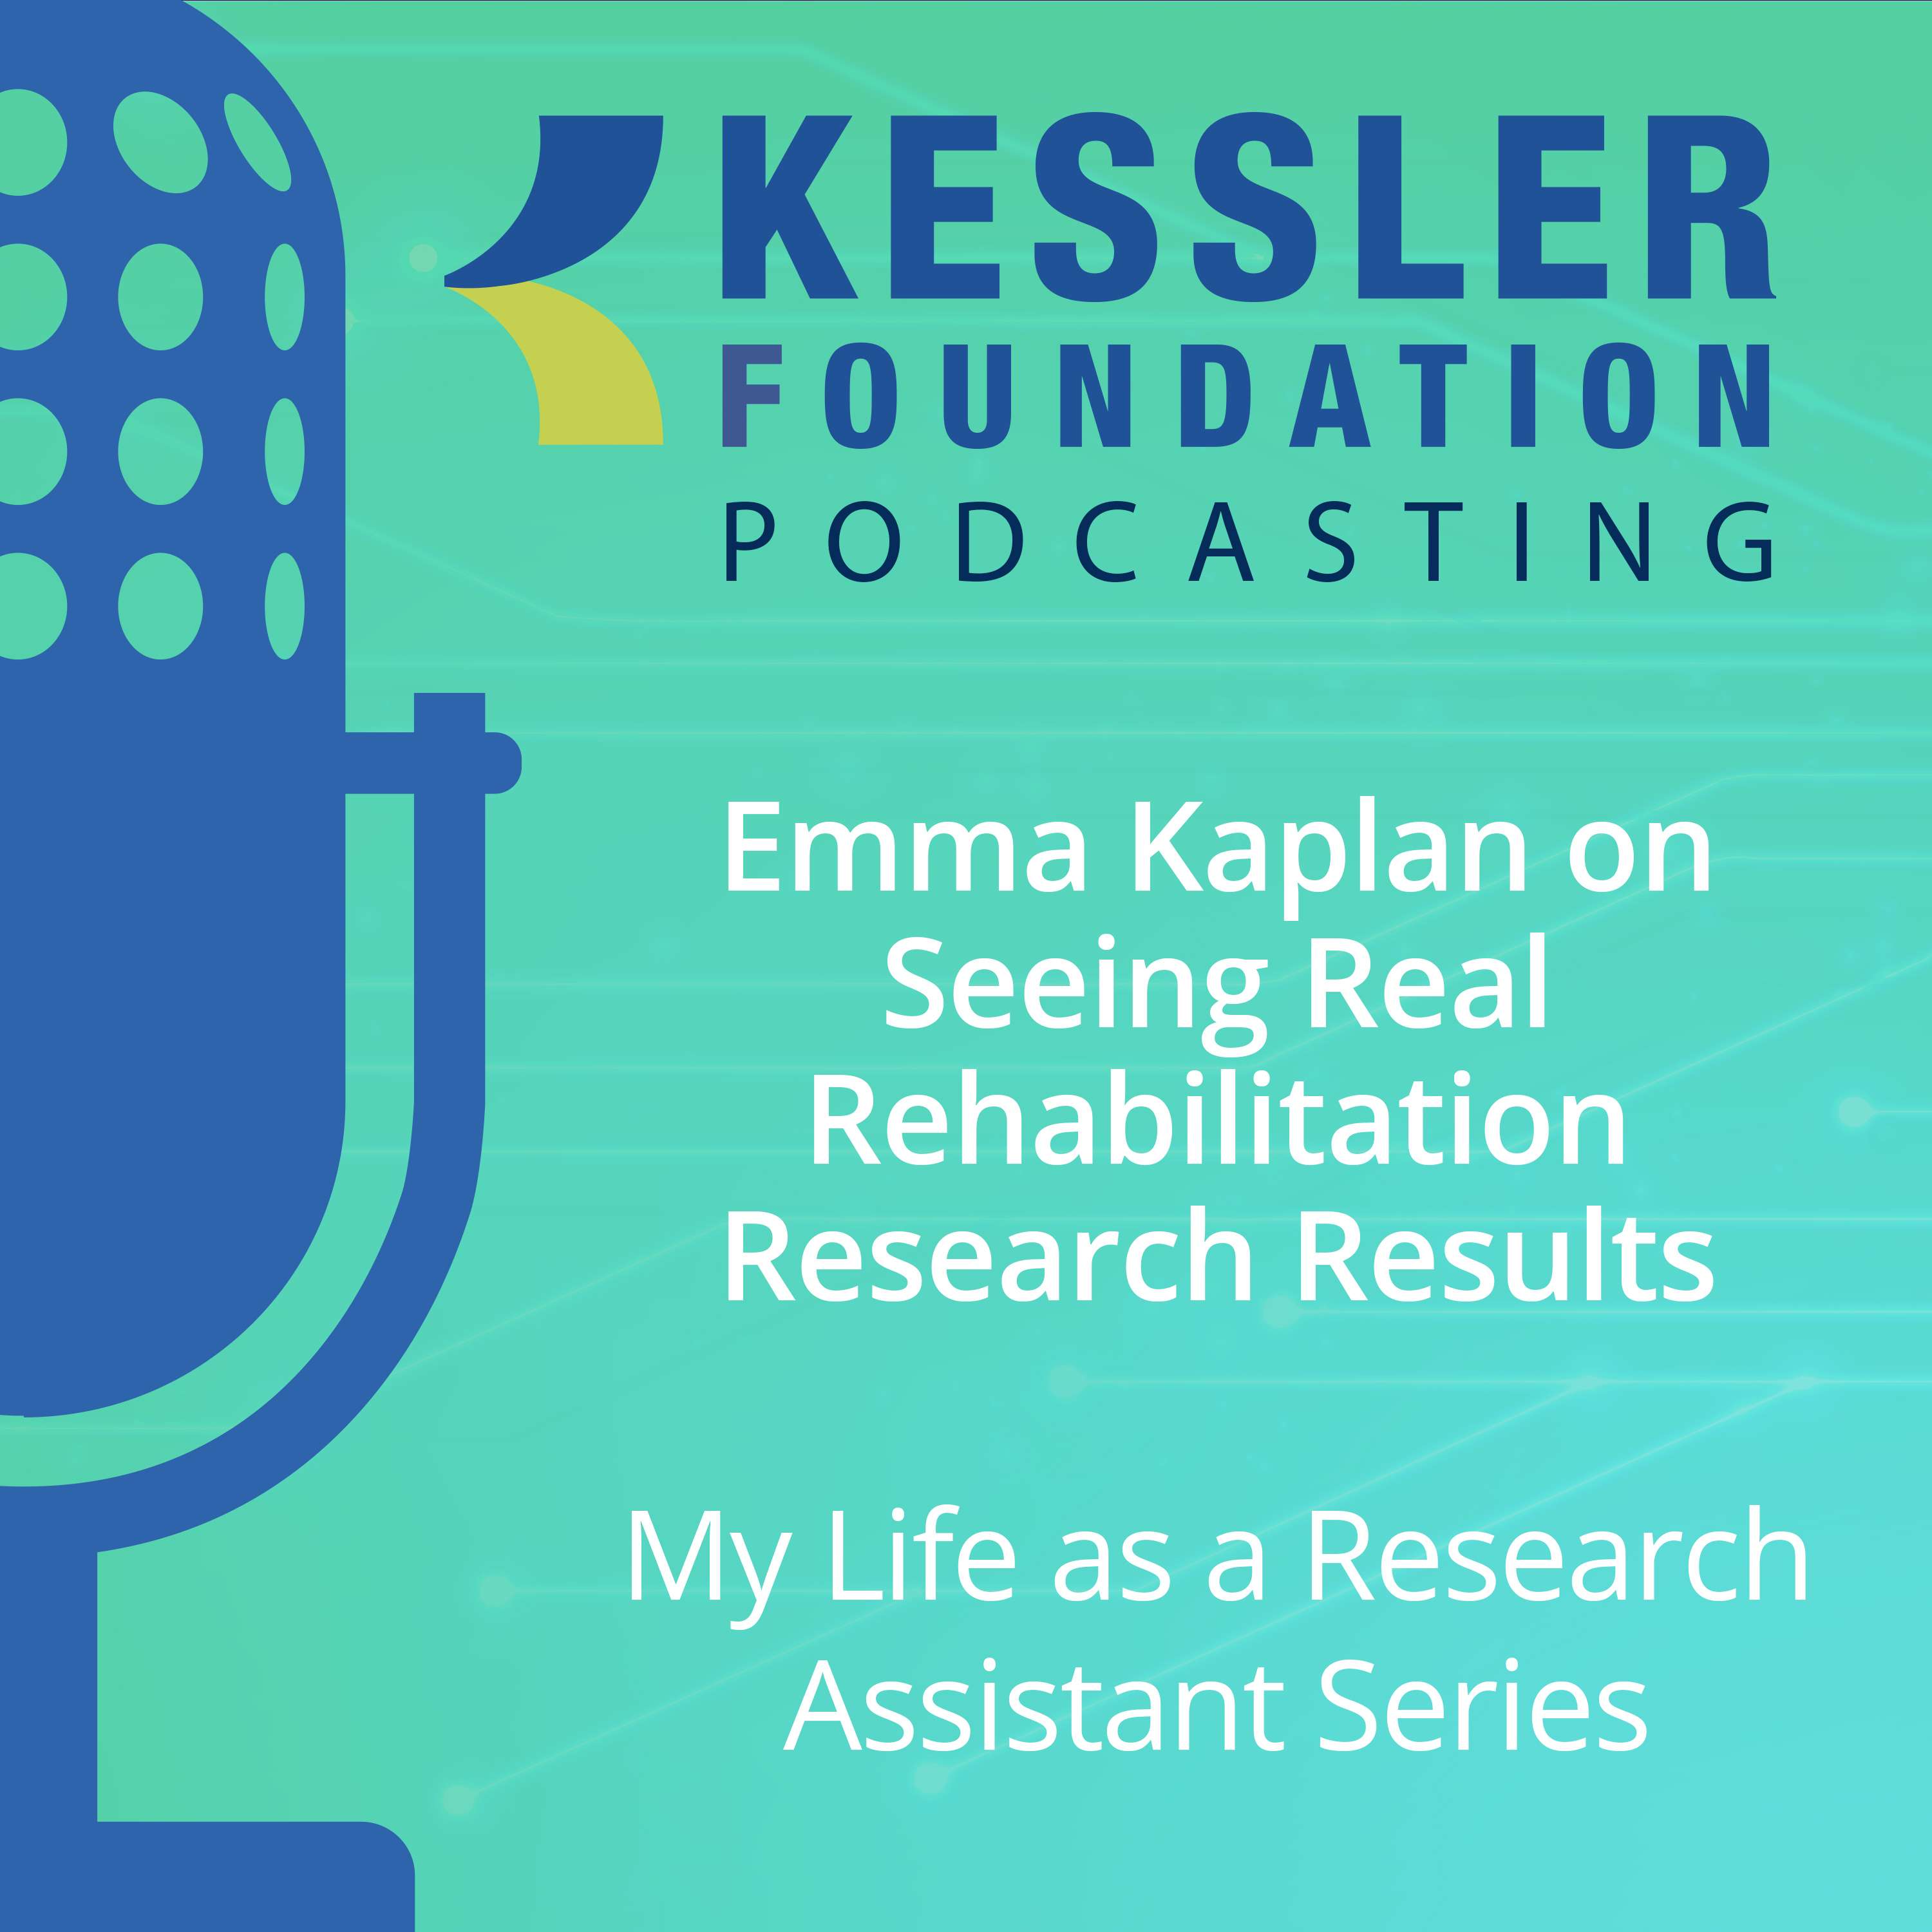 Emma Kaplan on Seeing Real Rehabilitation Research Results